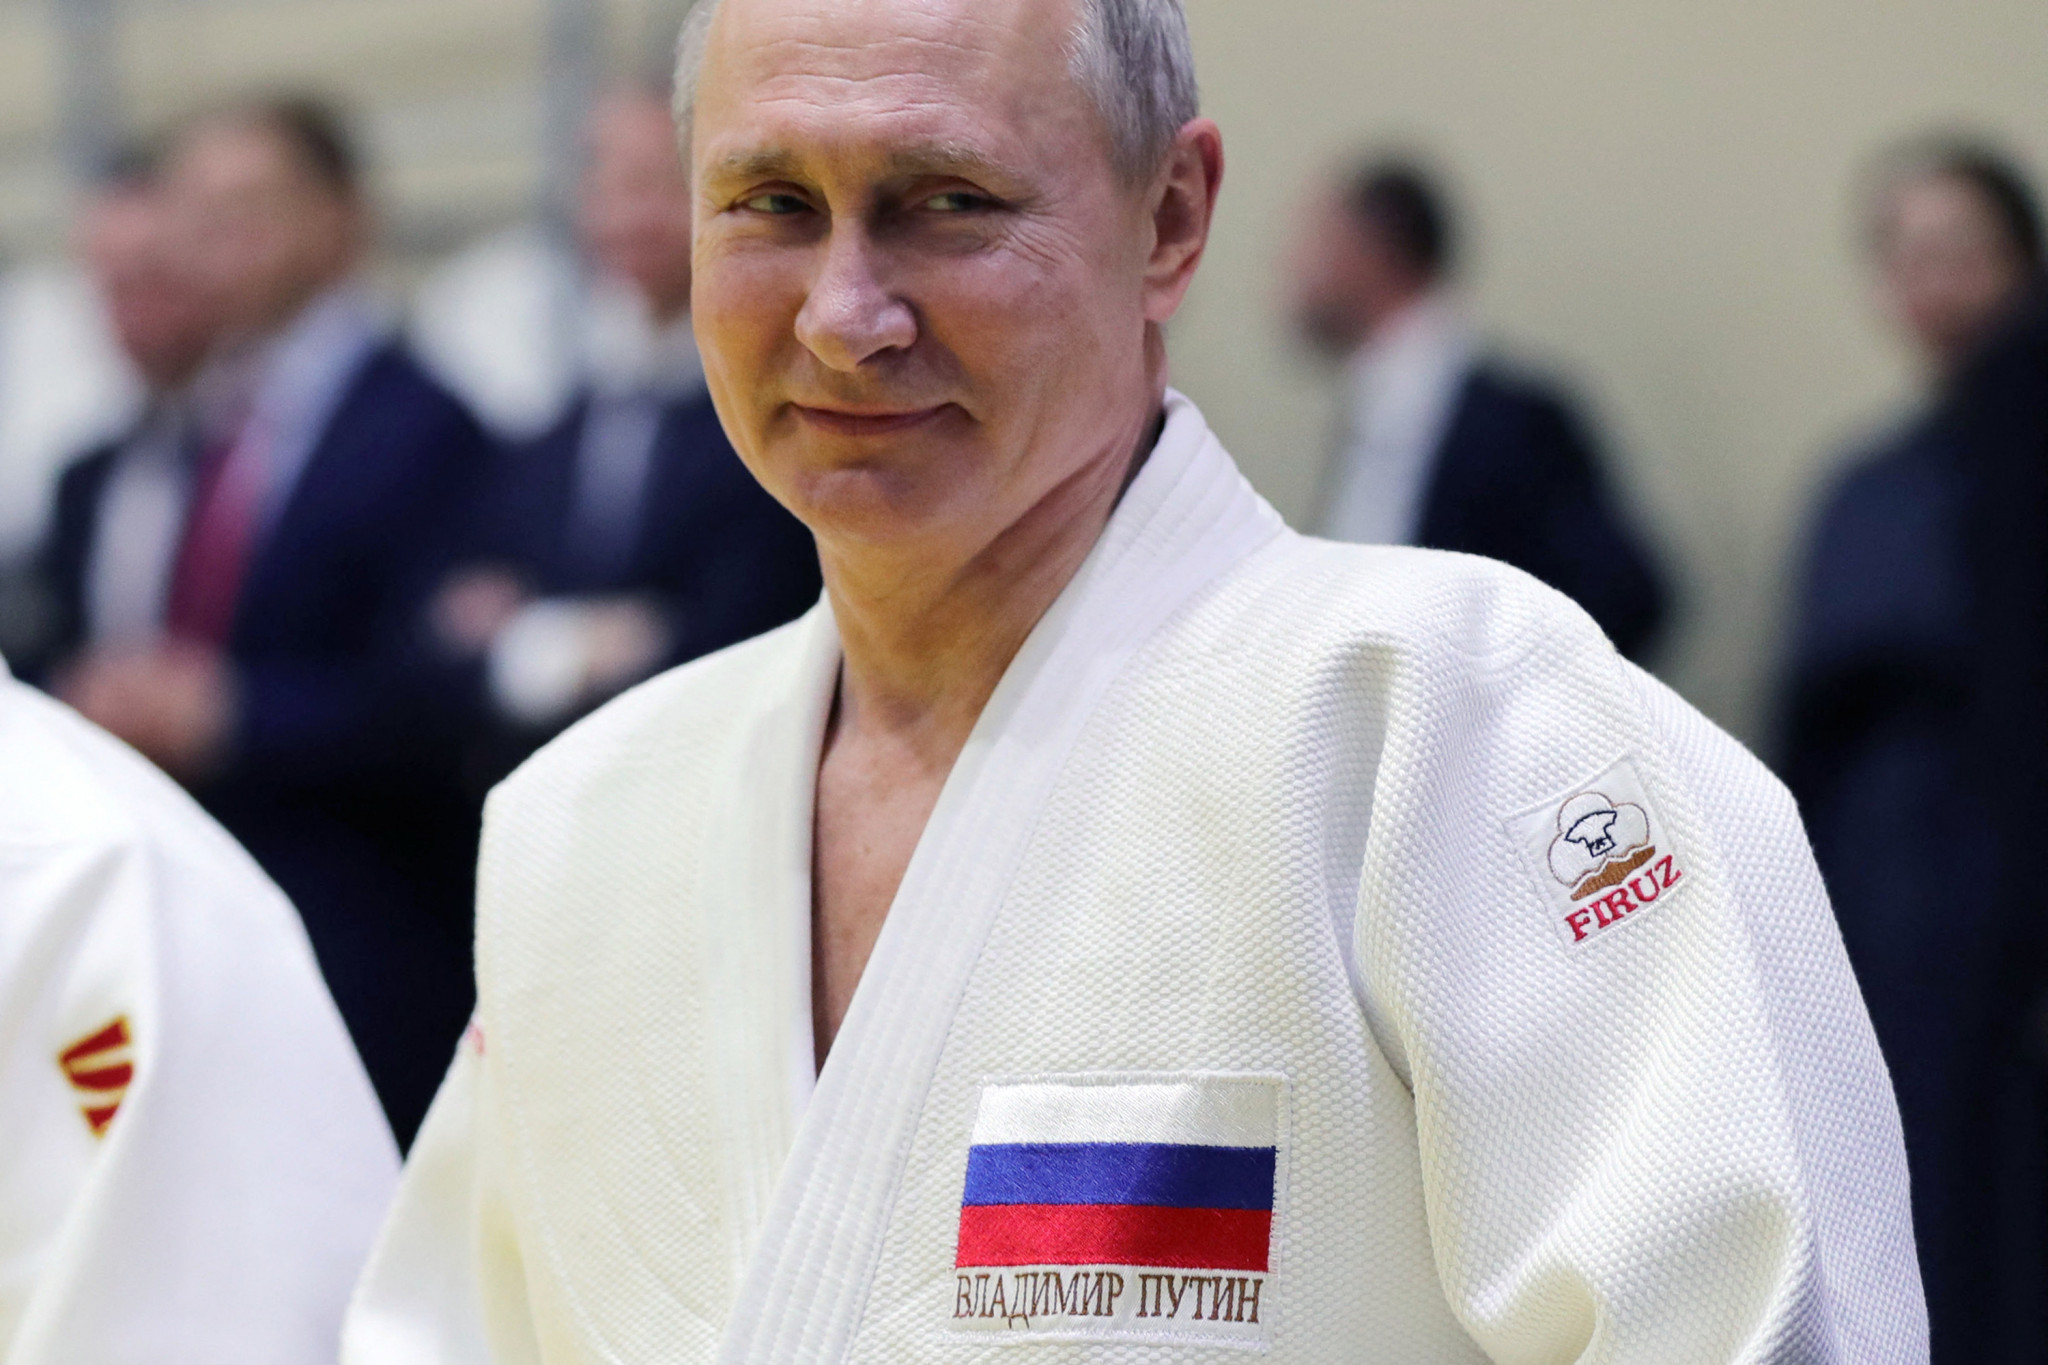 The IJF removed Russian President Vladimir Putin from all his positions in the sport in response to the war in Ukraine ©Getty Images